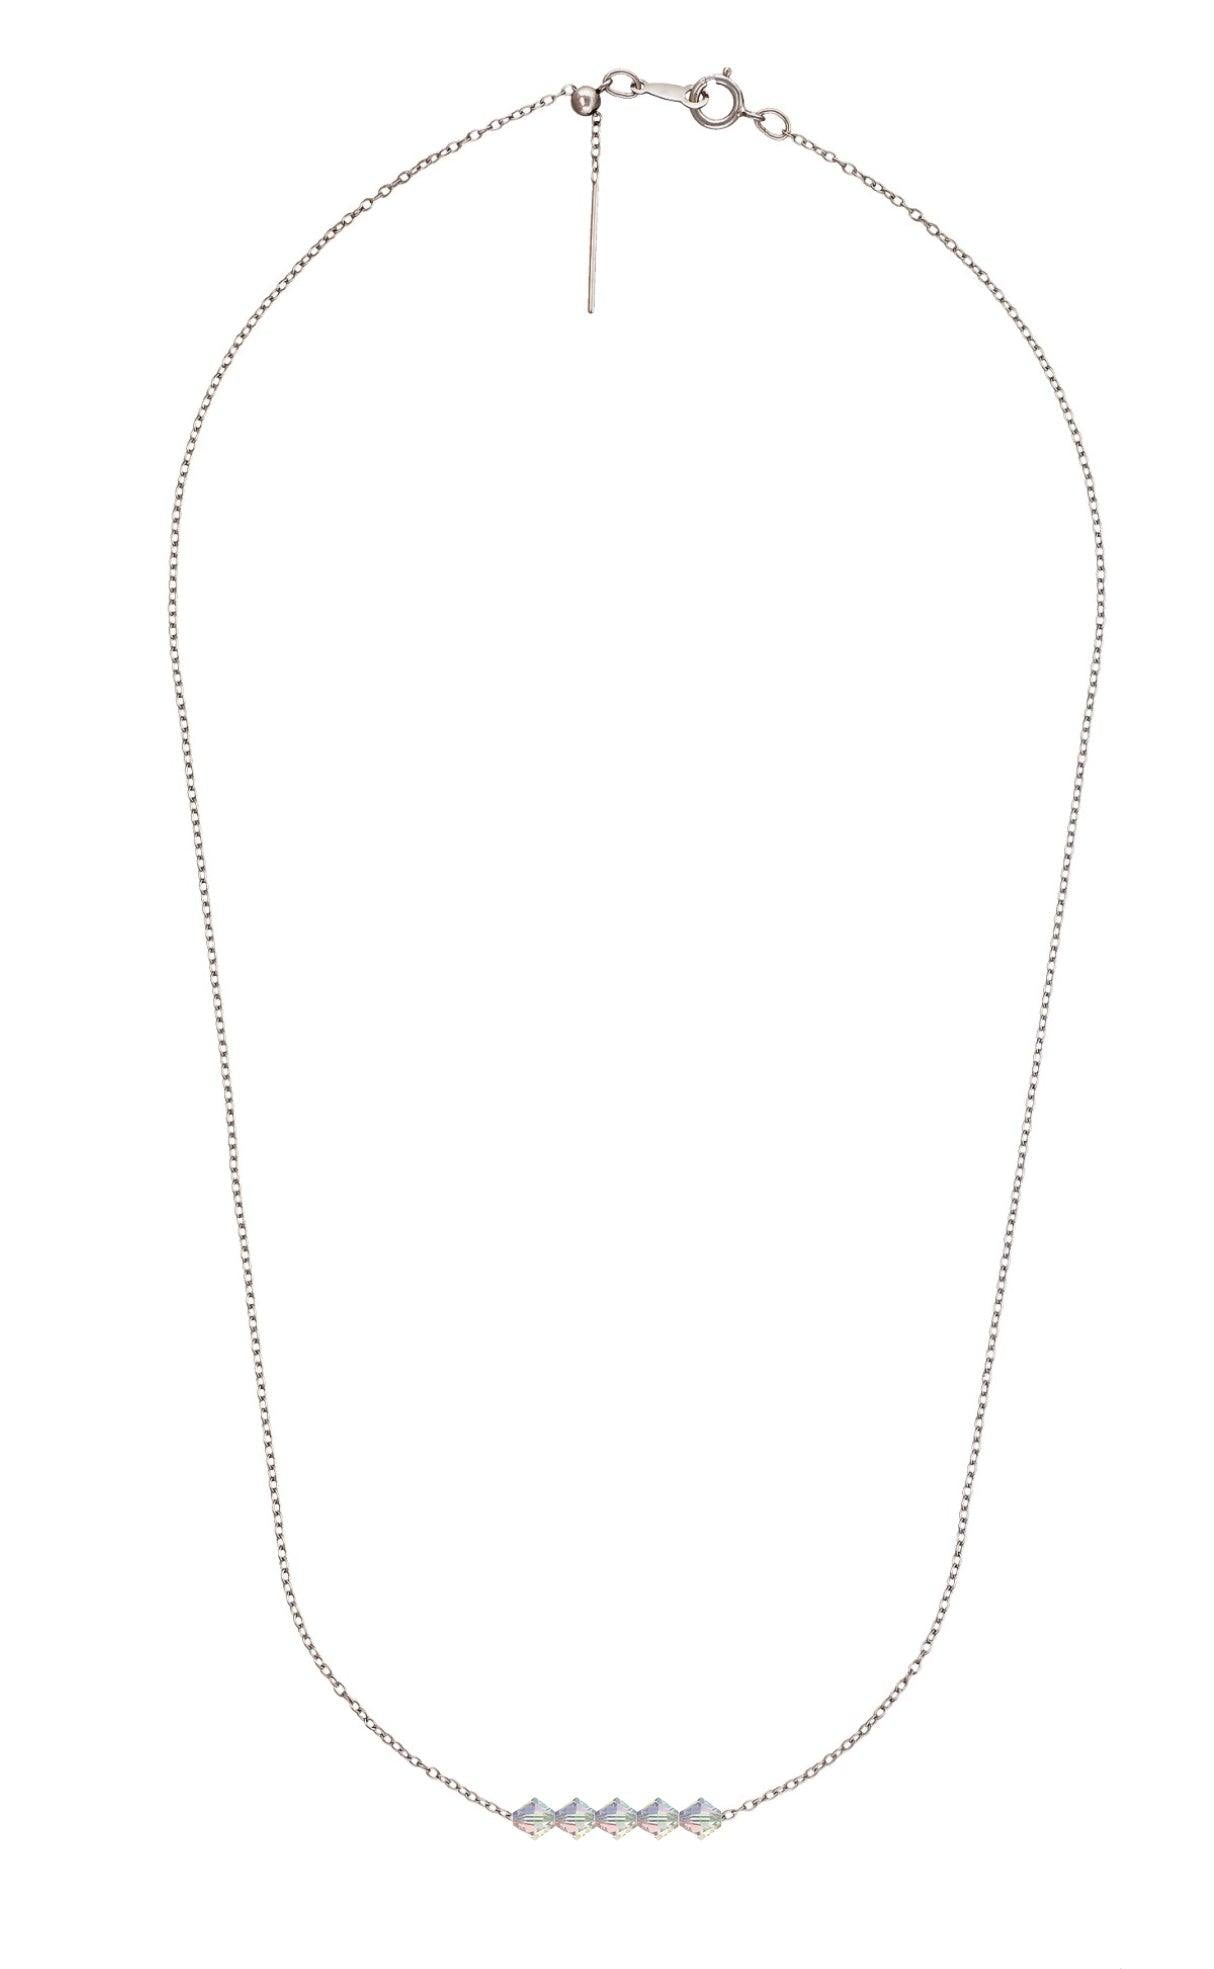 .925 Sterling silver Add-A-Bead Cable Chain Necklace - Adjustable (1 Piece) - Too Cute Beads